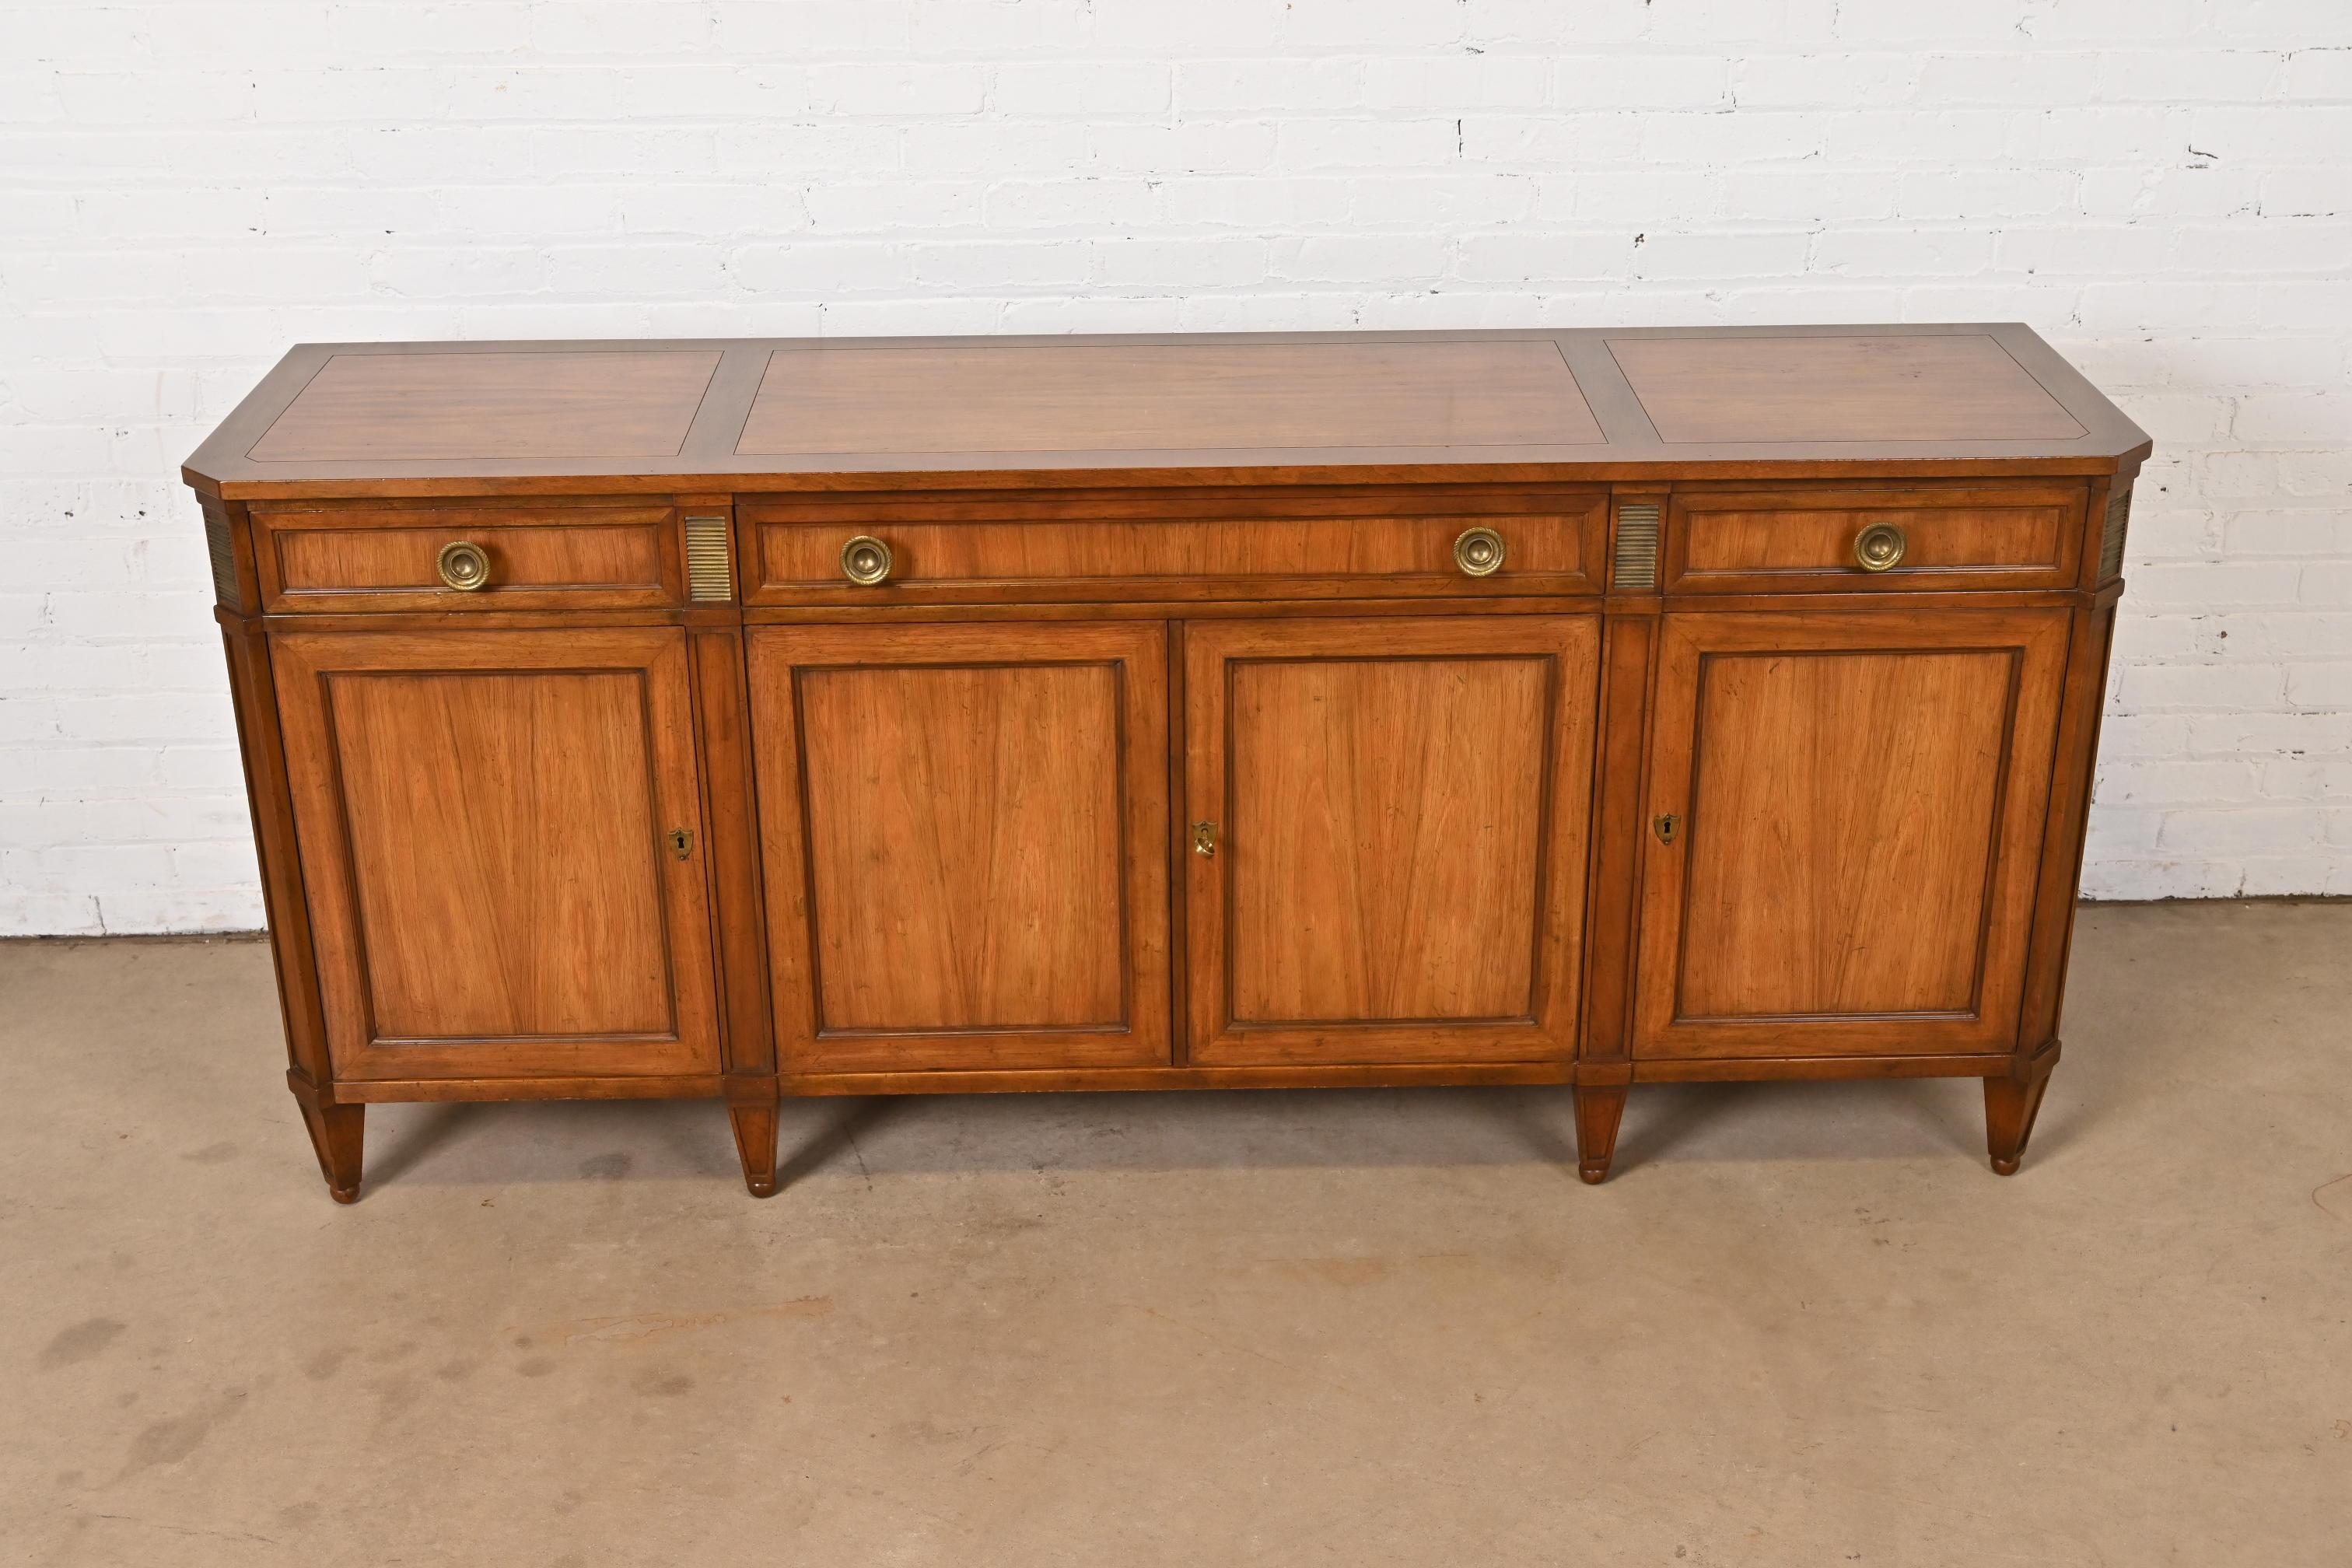 A gorgeous French Regency Louis XVI style sideboard, credenza, or bar cabinet

By Baker Furniture

USA, Circa 1960s

Book-matched rosewood and walnut, with brass accents and hardware. Lower cabinets lock, and original key is included.

Measures: